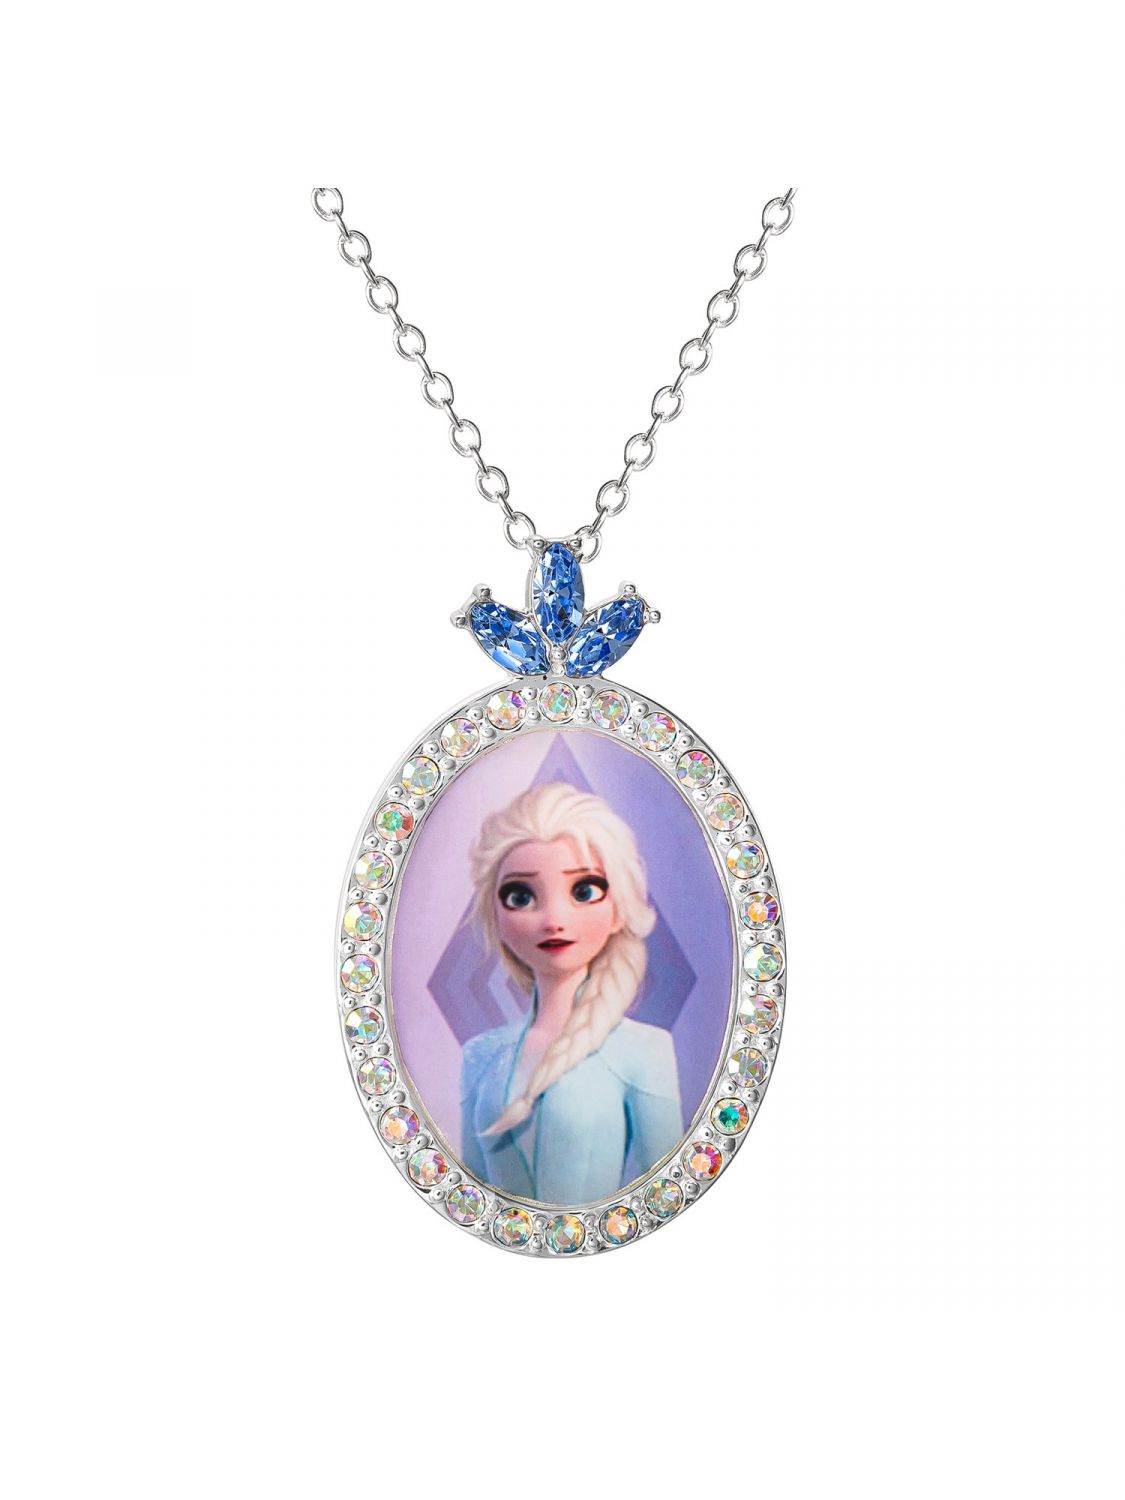 Frozen Chain Necklace | seeds.yonsei.ac.kr